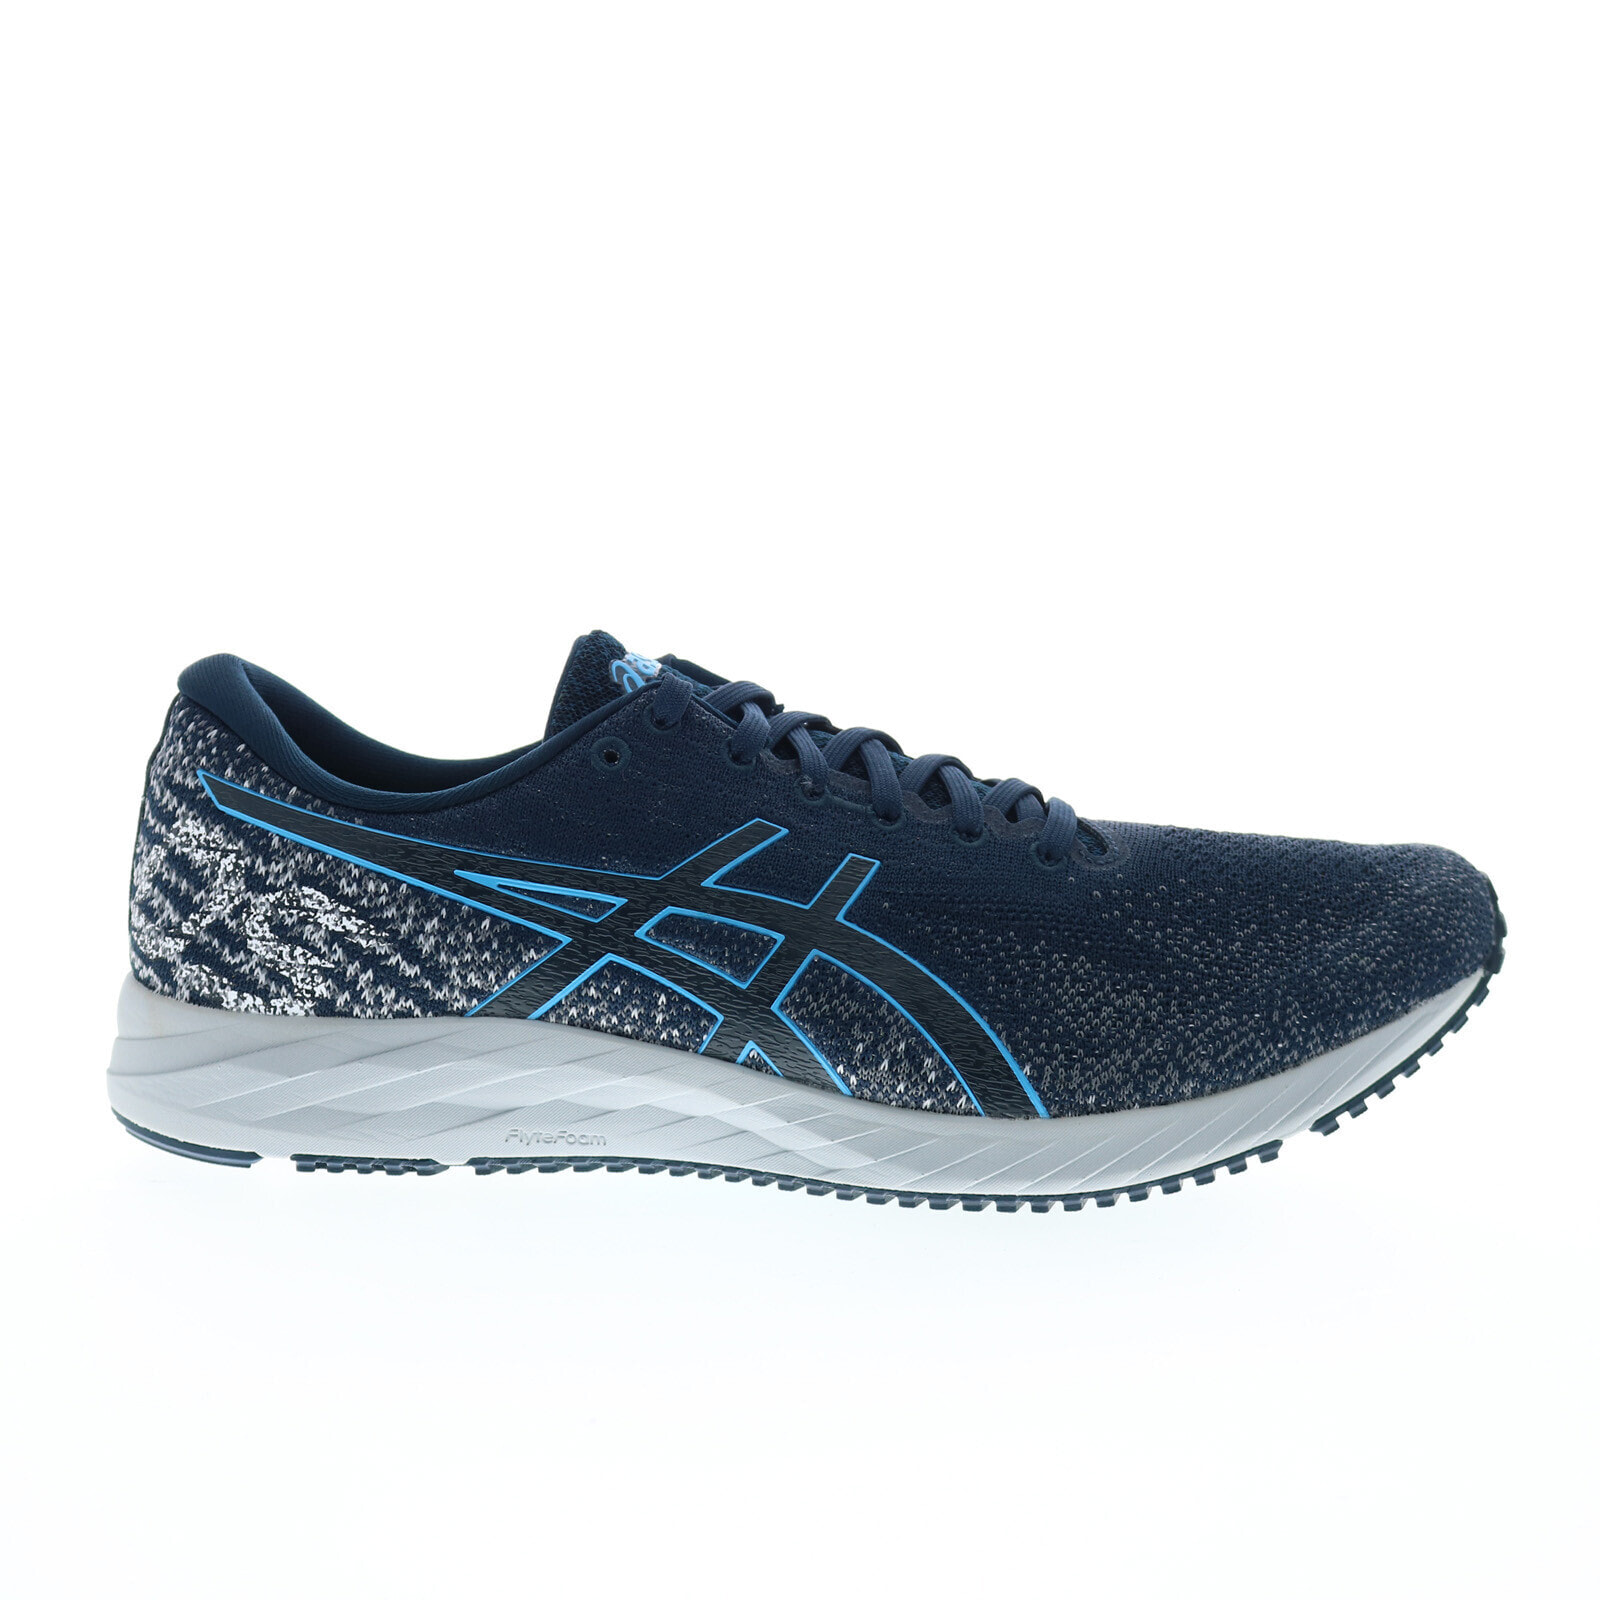 Asics Gel-DS Trainer 26 1011B240-400 Mens Blue Athletic Running Shoes